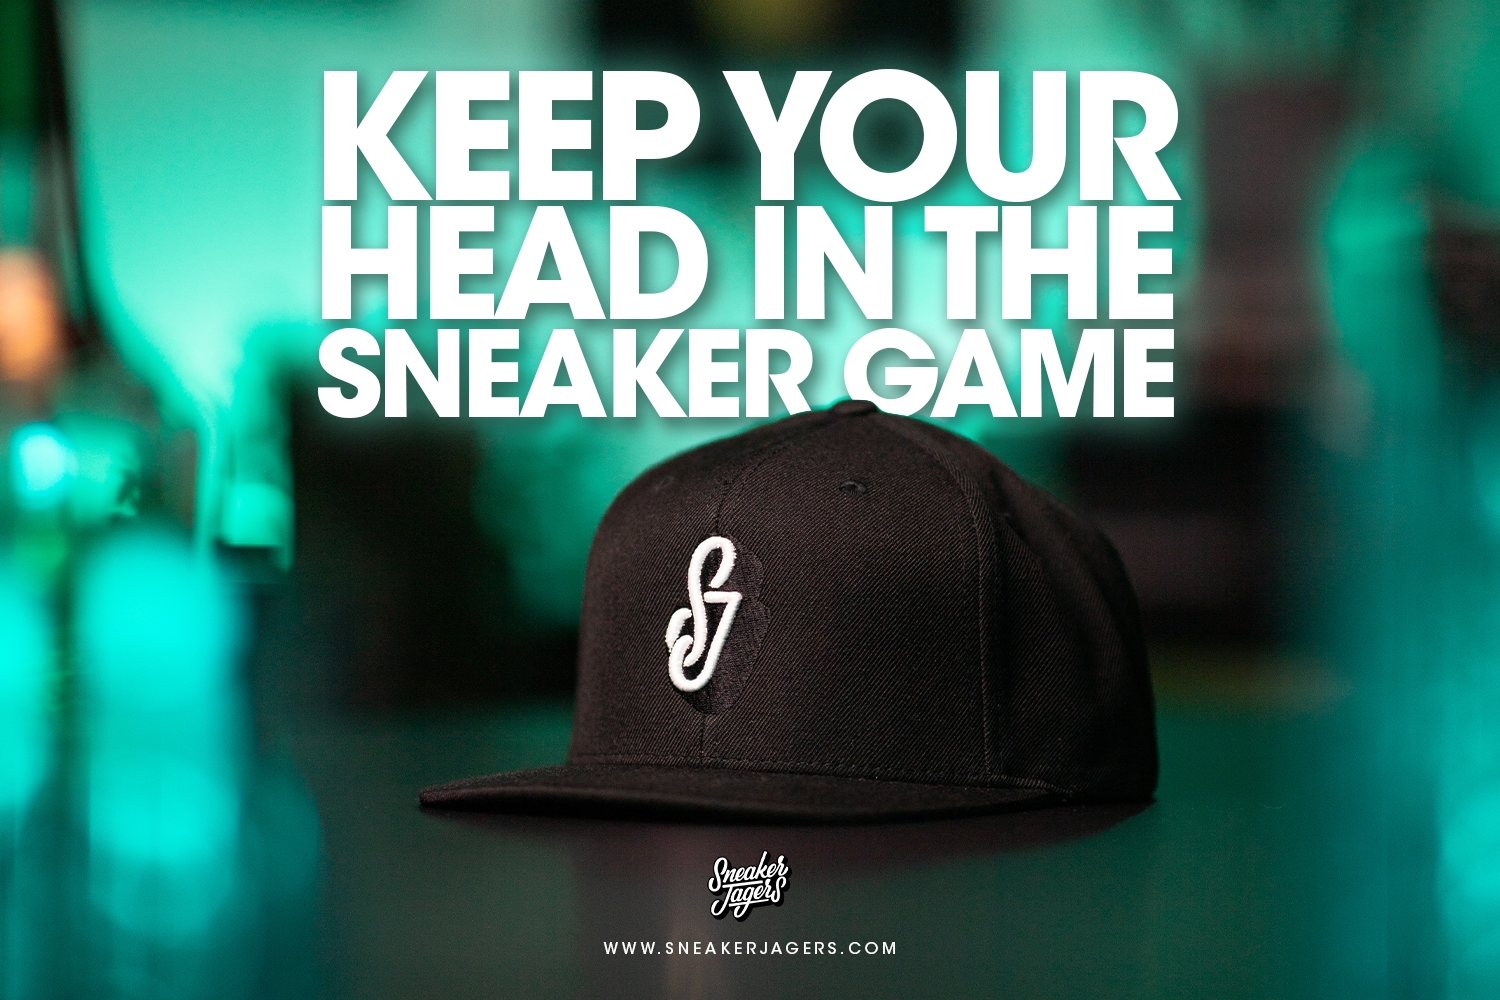 Out now: Sneakerjagers Classic Snapback Cap